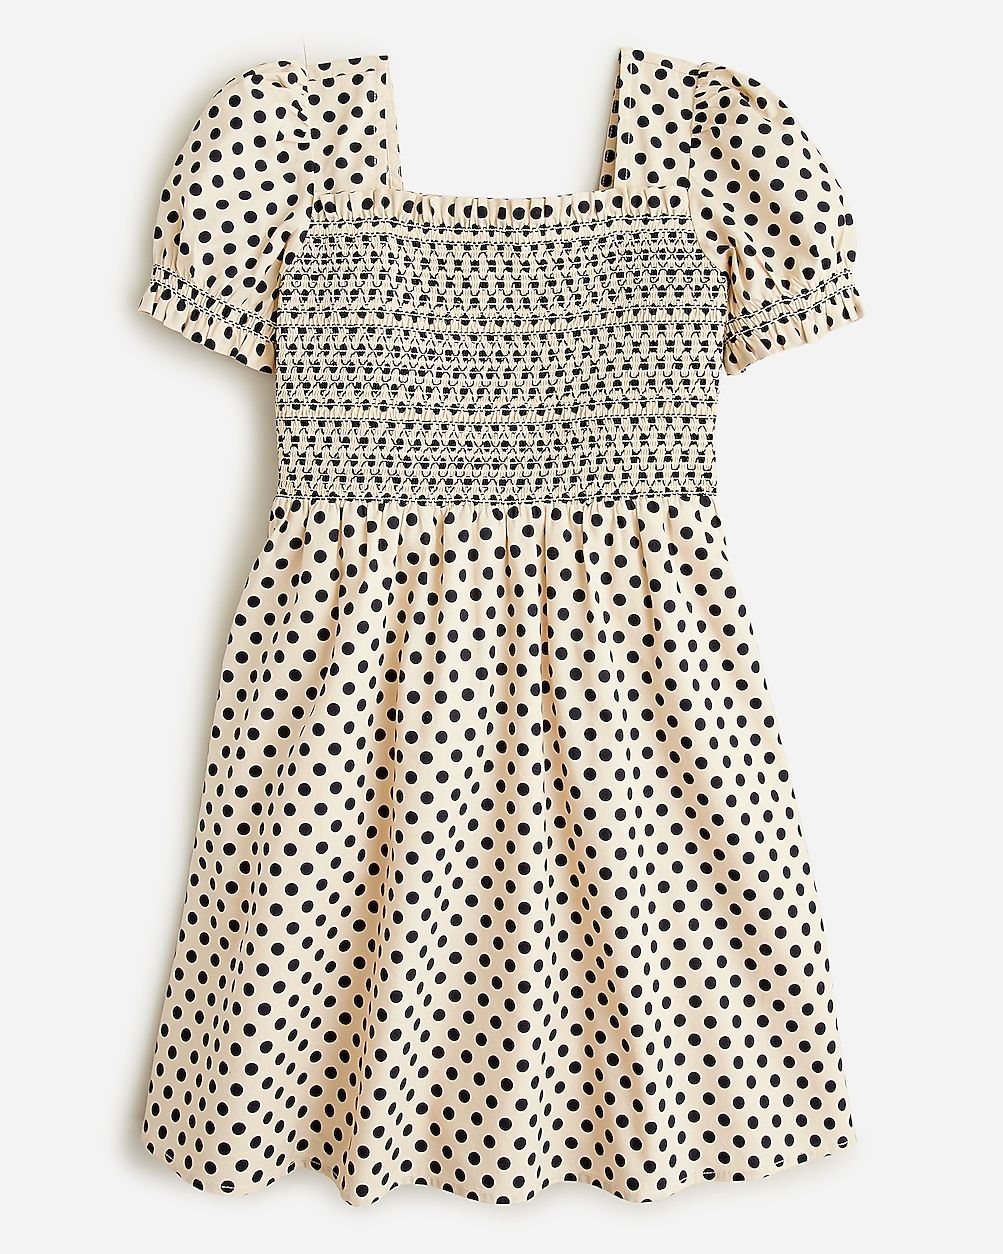 Girls' smocked dress in cotton poplin dot$98.0030% off full price with code SHOP30Toasted CreamSe... | J.Crew US